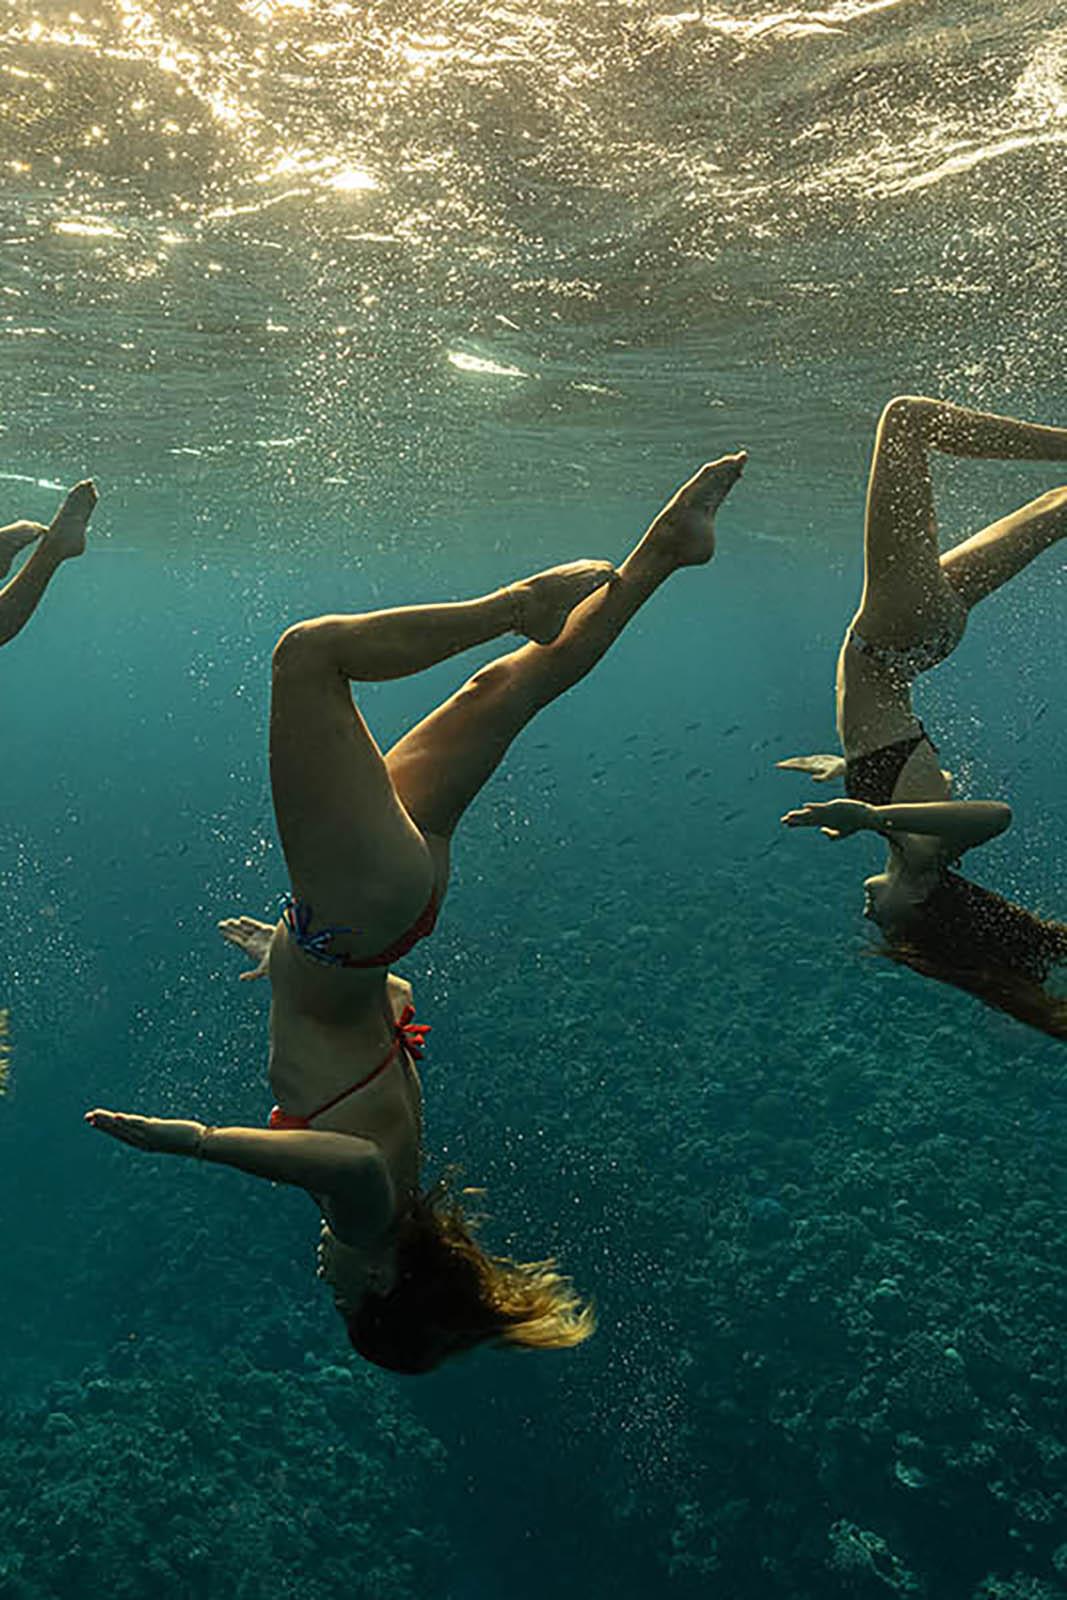 Synchronised swimming in the Blue - Fine art print, Color underwater photography - Photograph by Olivier Borde